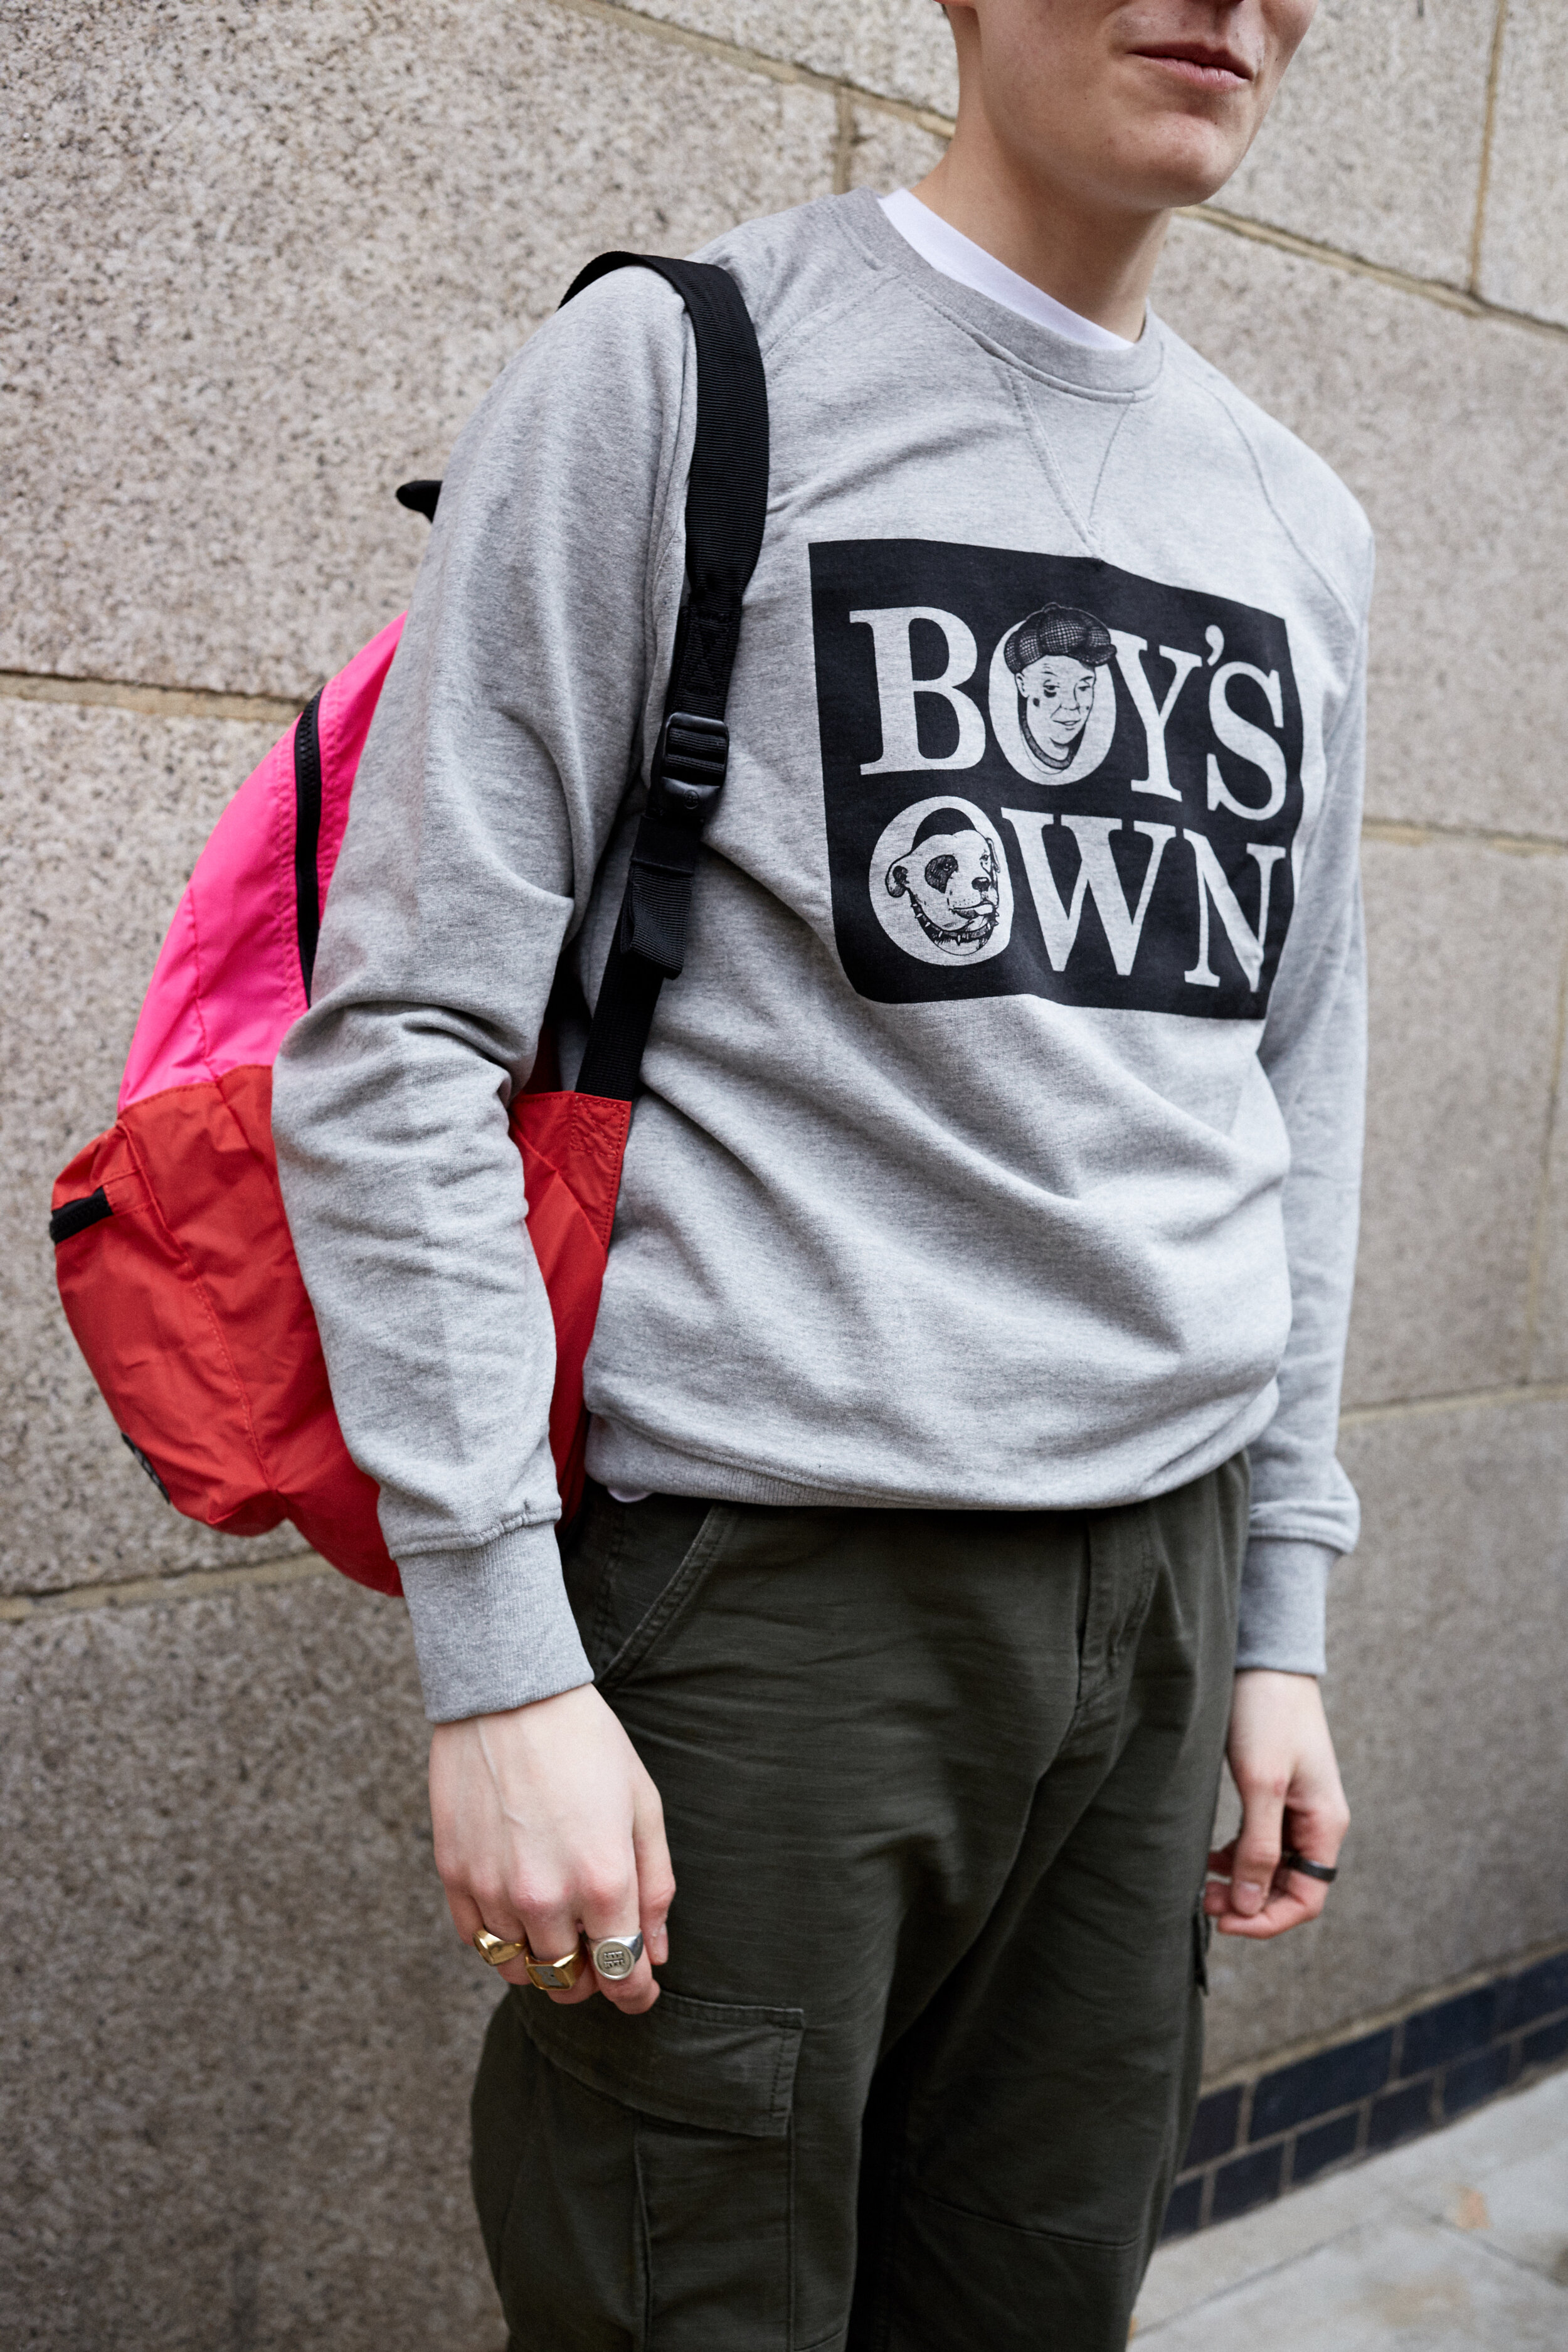 BOY BERLIN GERMANY UNOFFICIAL FASHION HIPSTER LONDON ADULTS & KIDS HOODIE